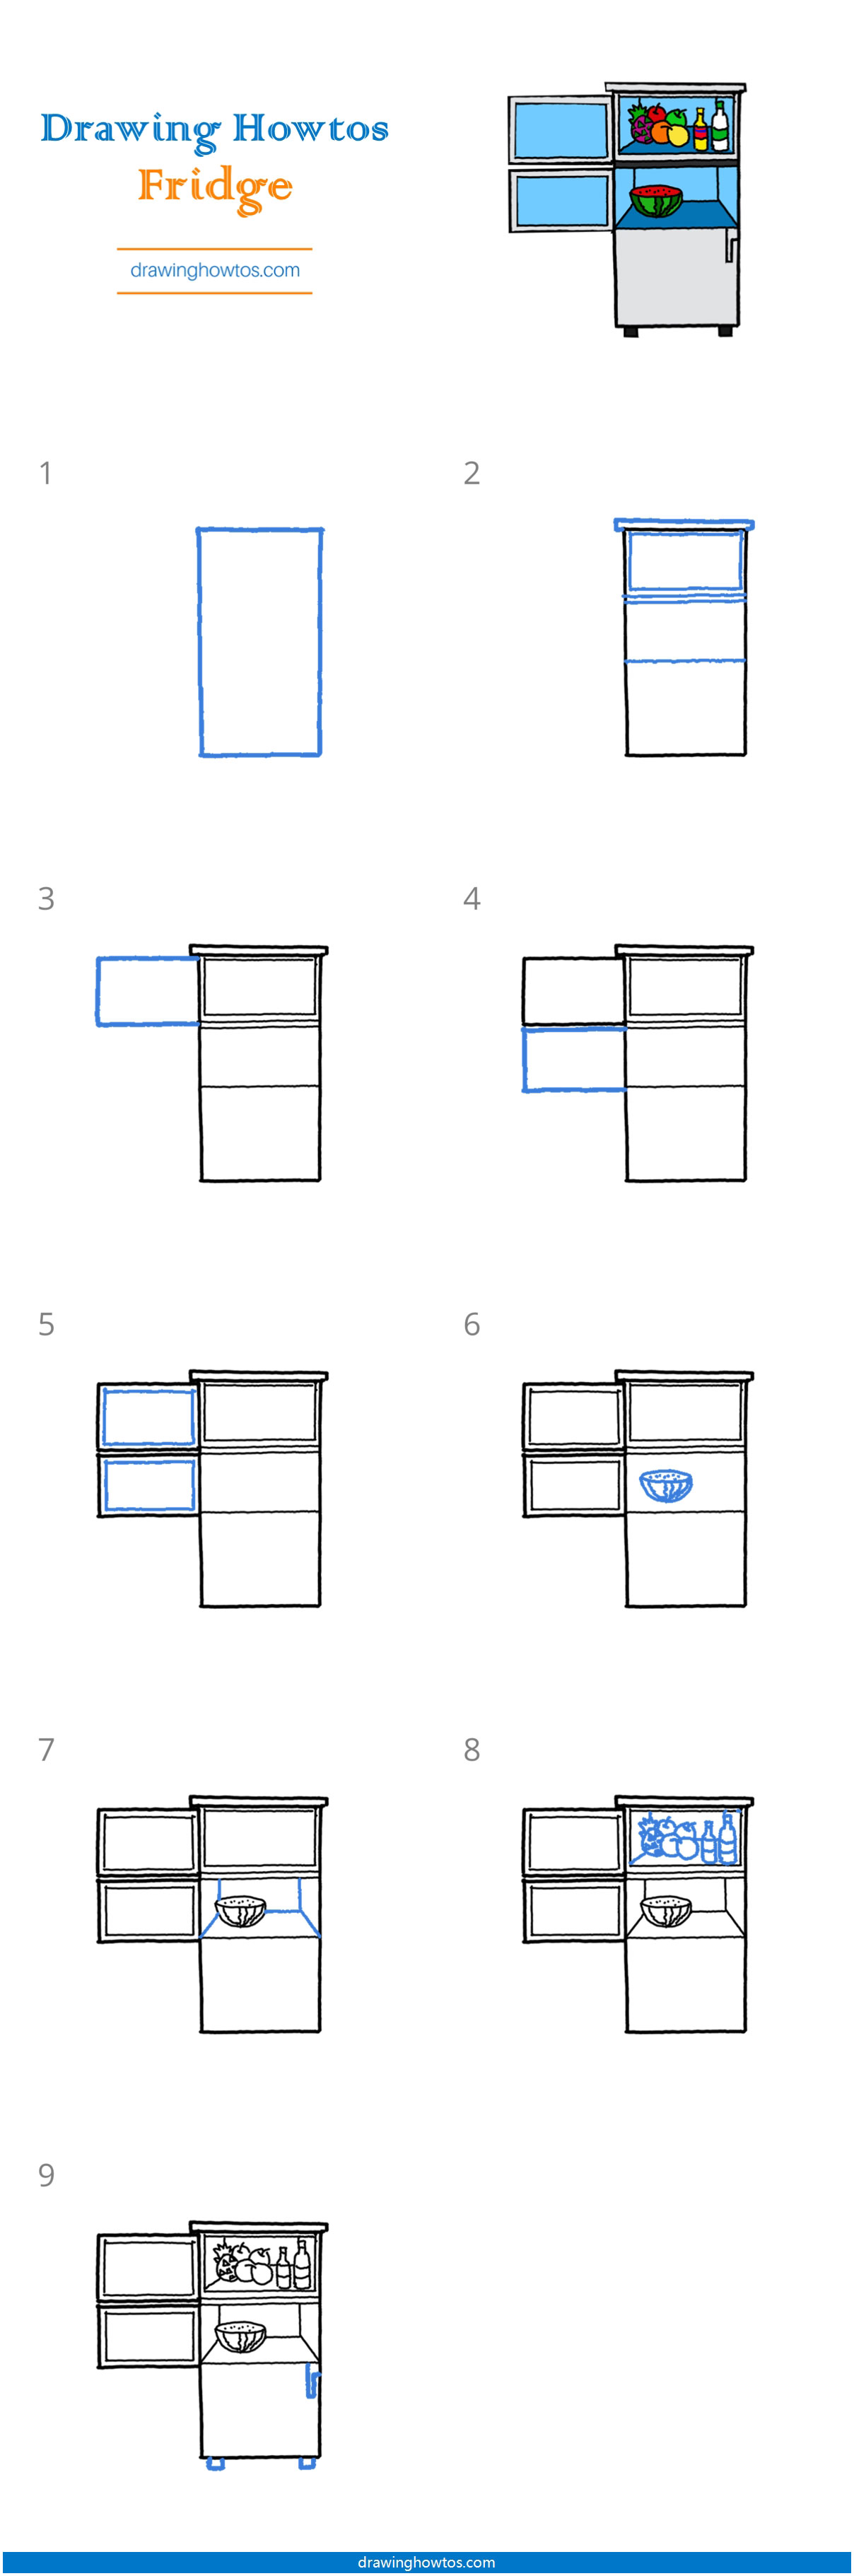 How to Draw a Fridge Step by Step